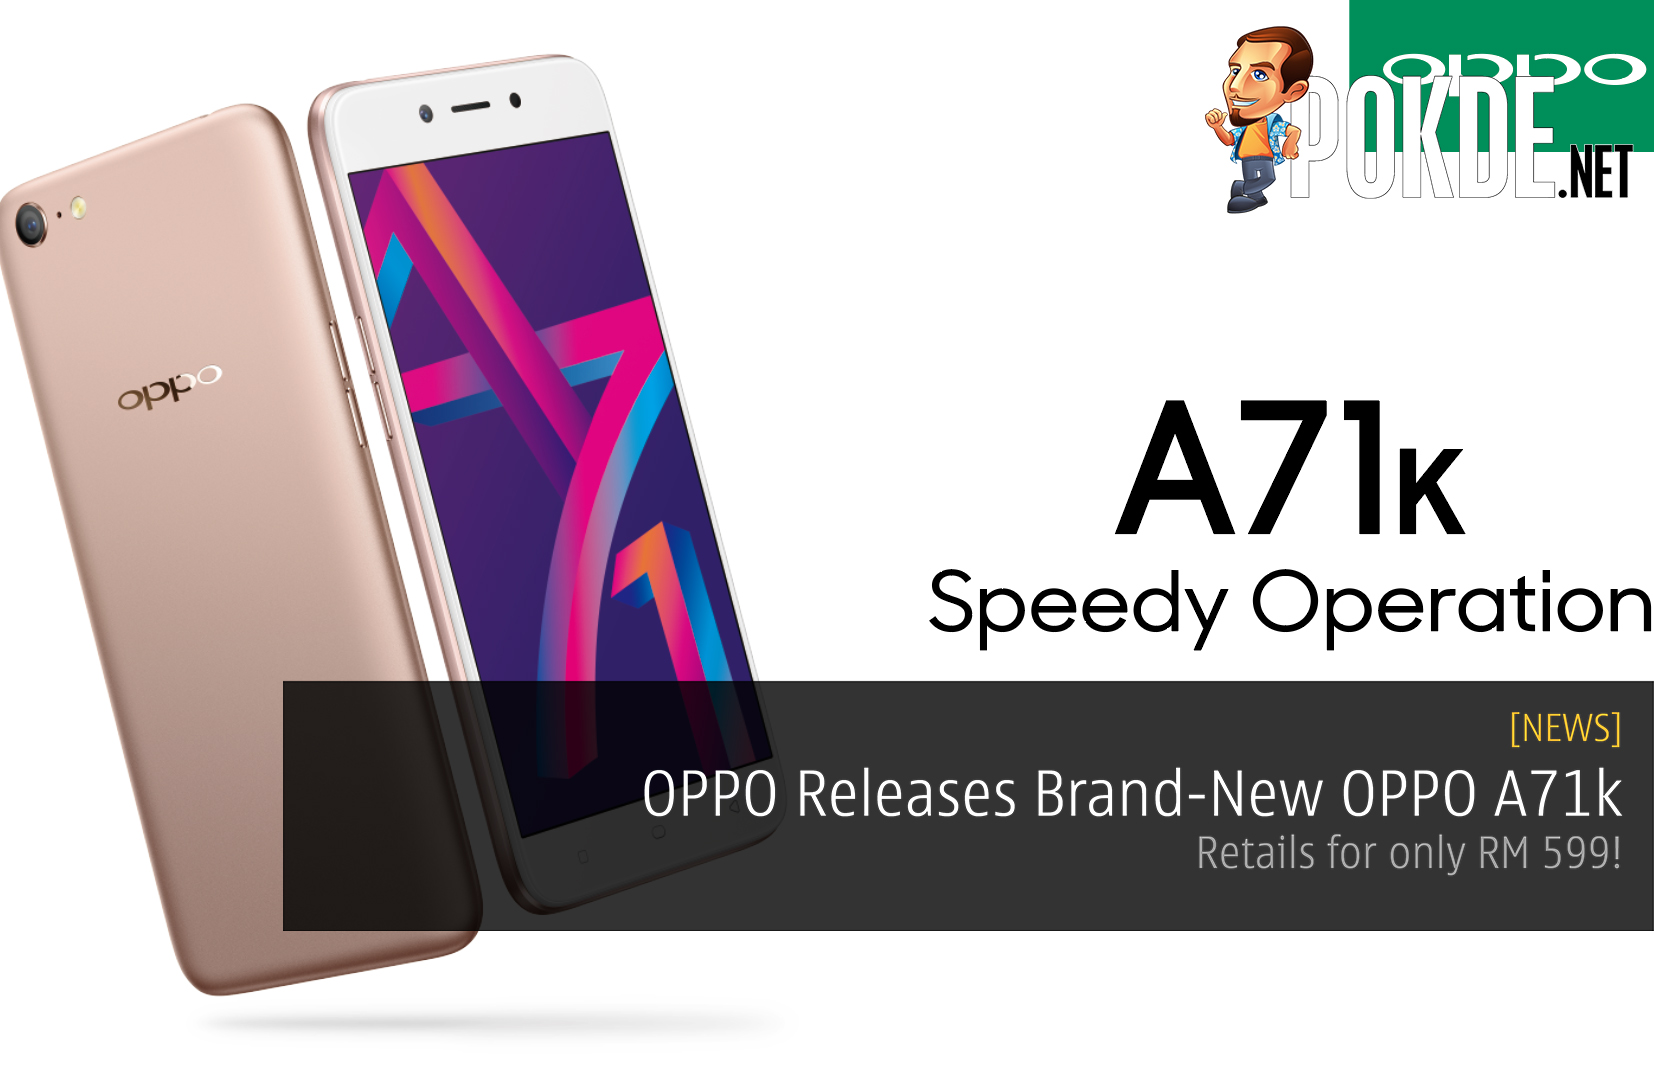 OPPO Releases Brand-New OPPO A71k - Retails for only RM 599! 27